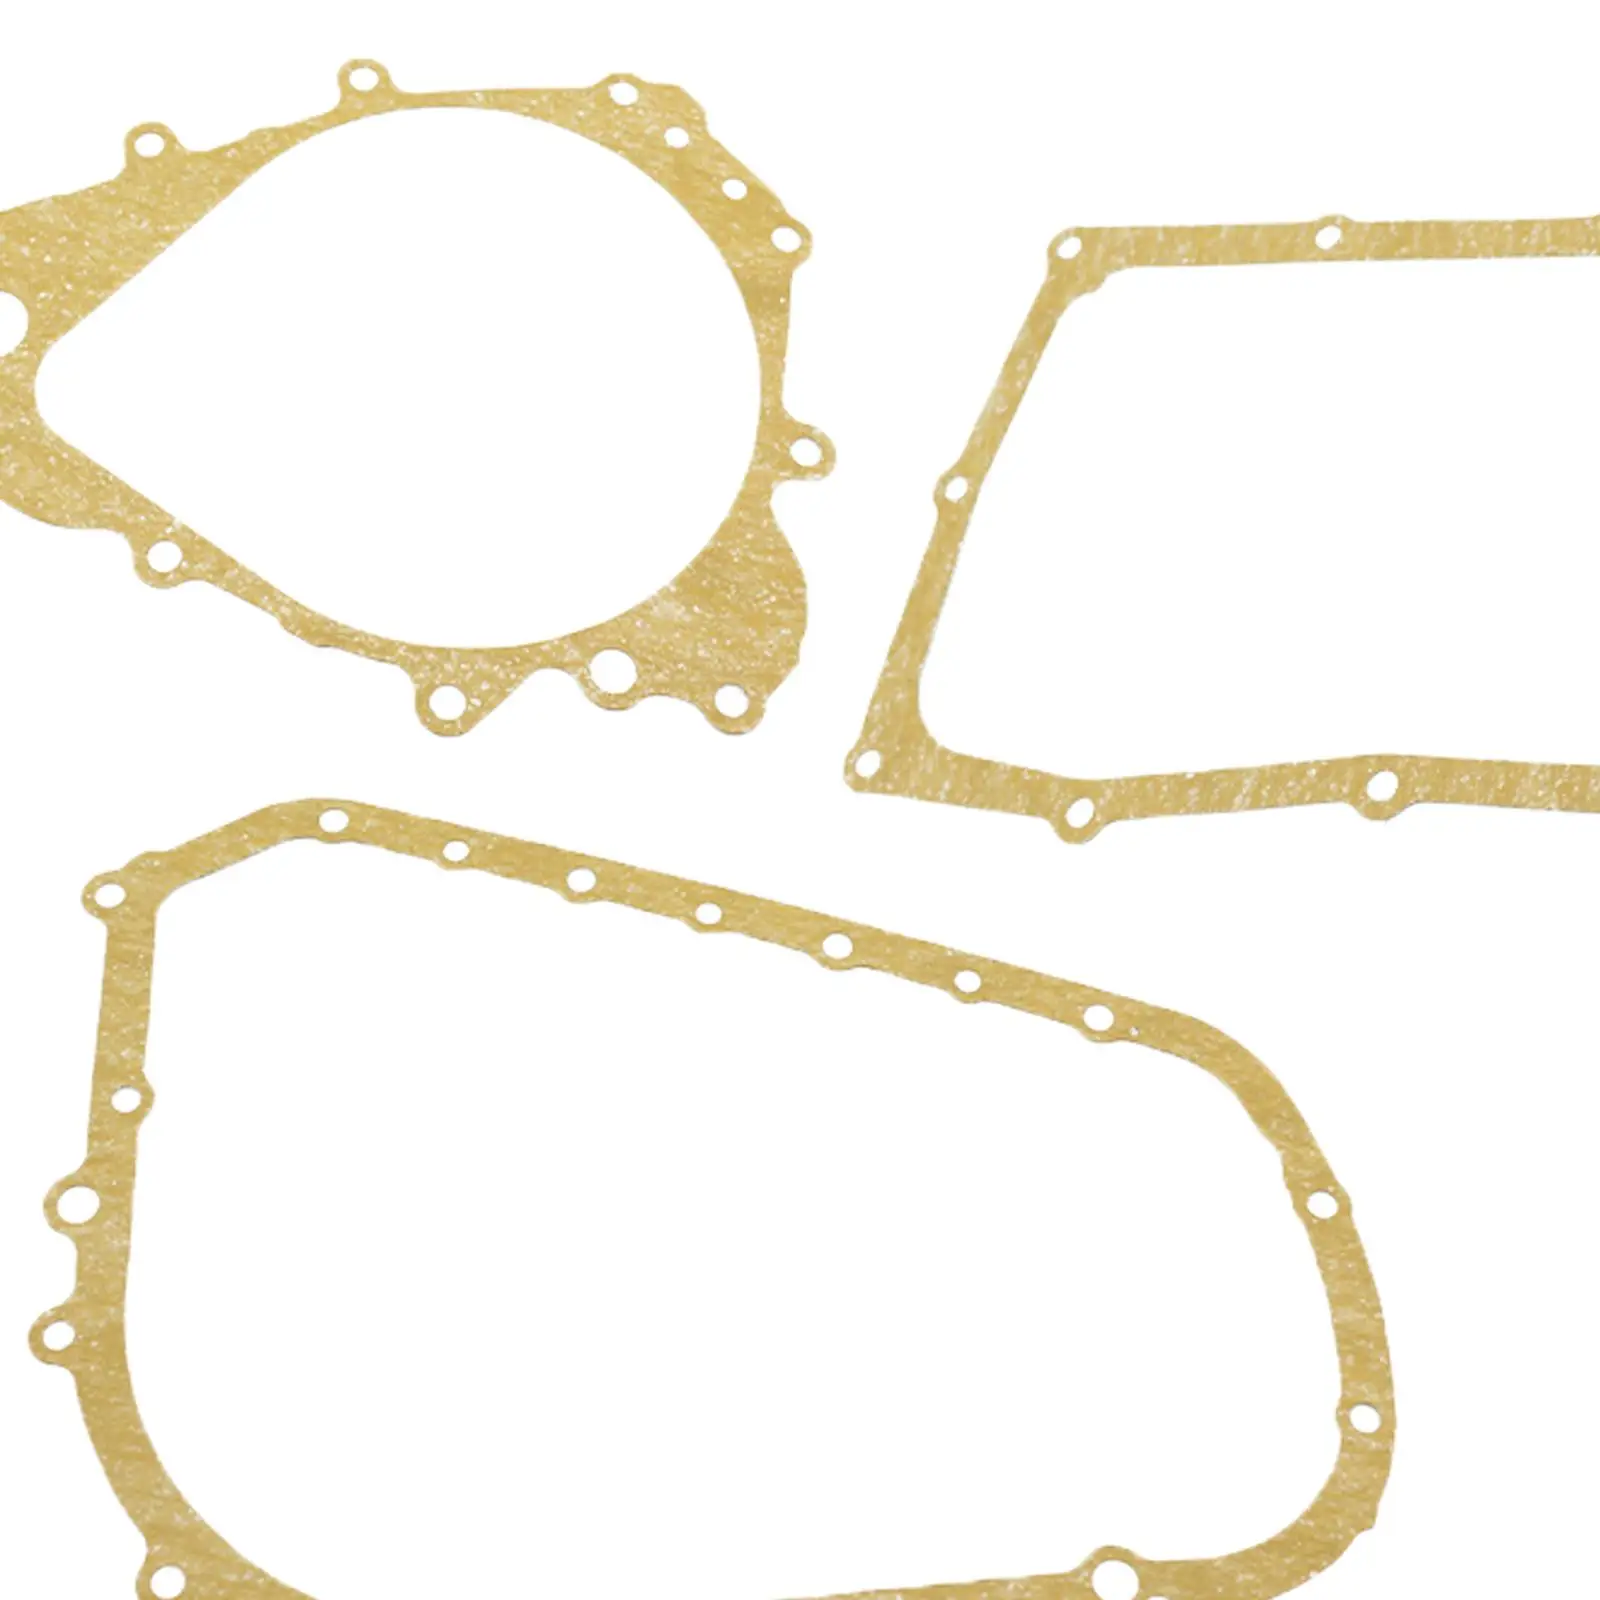 Clutch Oil Pan Generator Cover Gasket Direct Replaces Spare Parts for Suzuki Durable